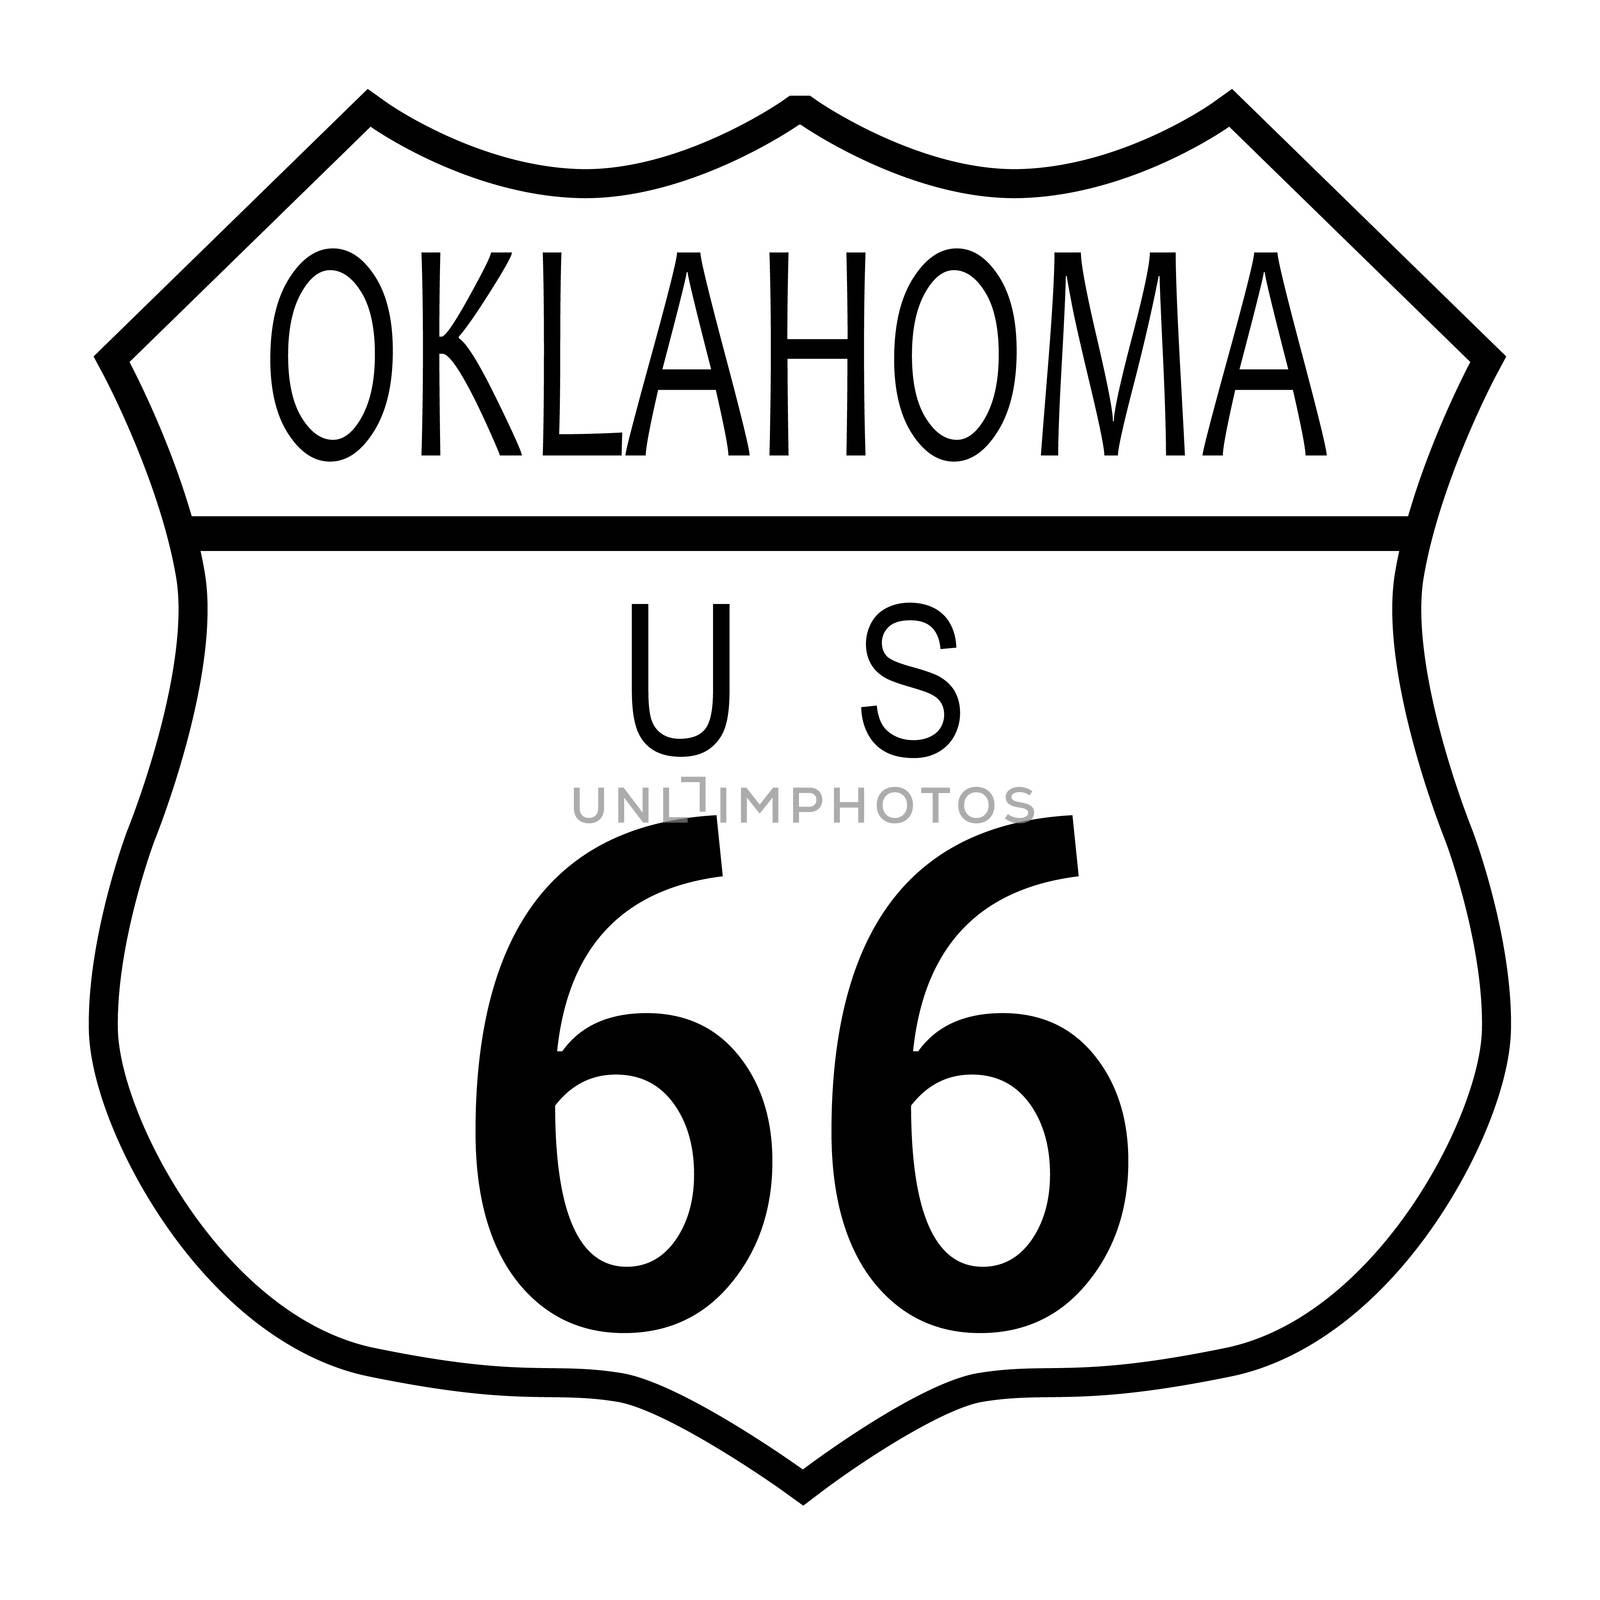 Route 66 traffic sign over a white background and the state name Oklahoma